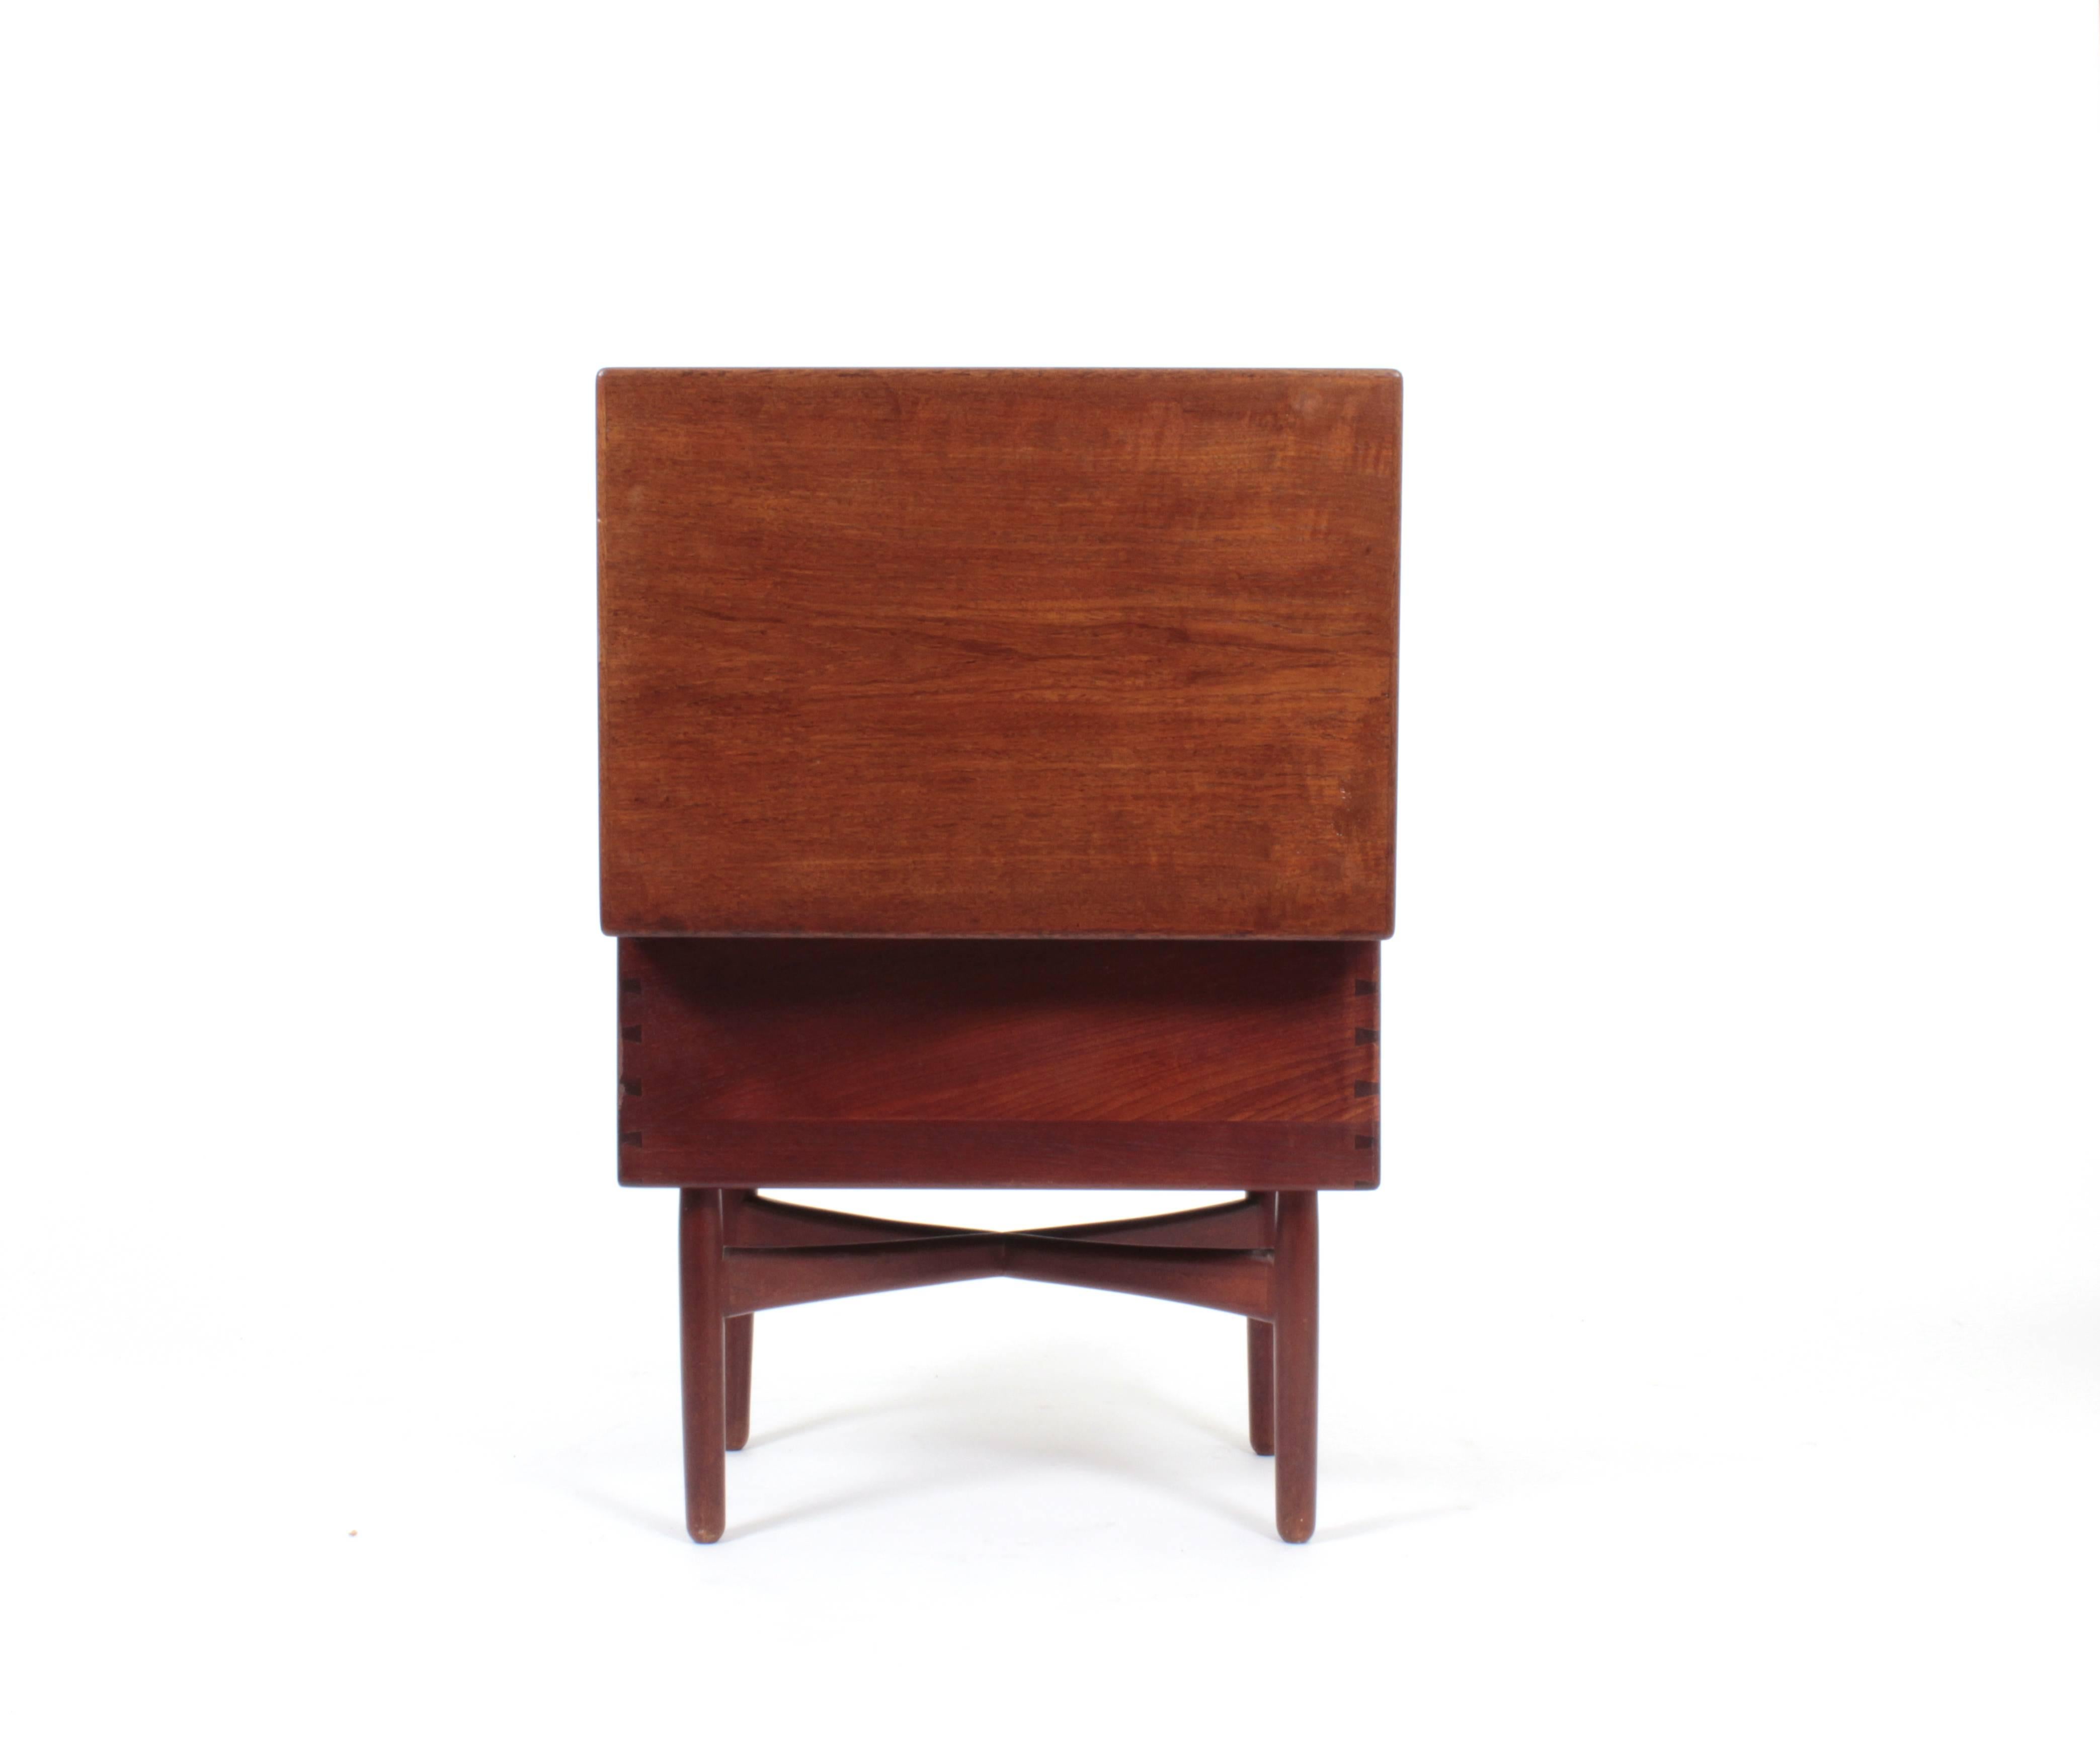 Mid-20th Century Danish Teak Sewing Table in the Style of Ludvig Pontoppidan, circa 1940 For Sale